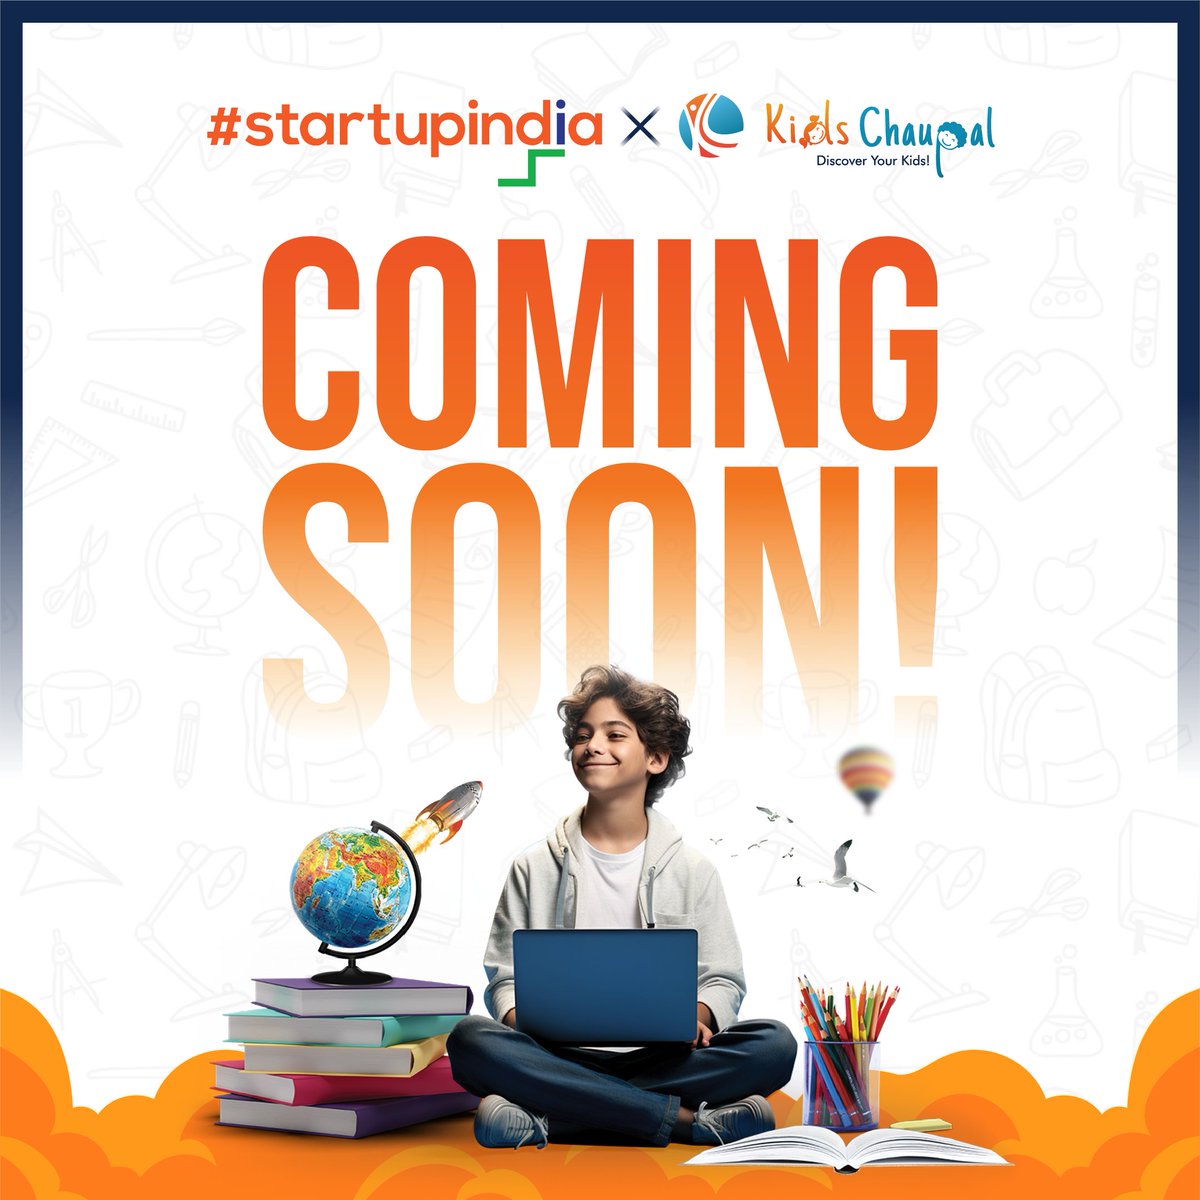 Stay tuned for an exciting reveal that's just around the corner🙌🏾 @startupindia @KidsChaupal #startupindia #kidschaupal